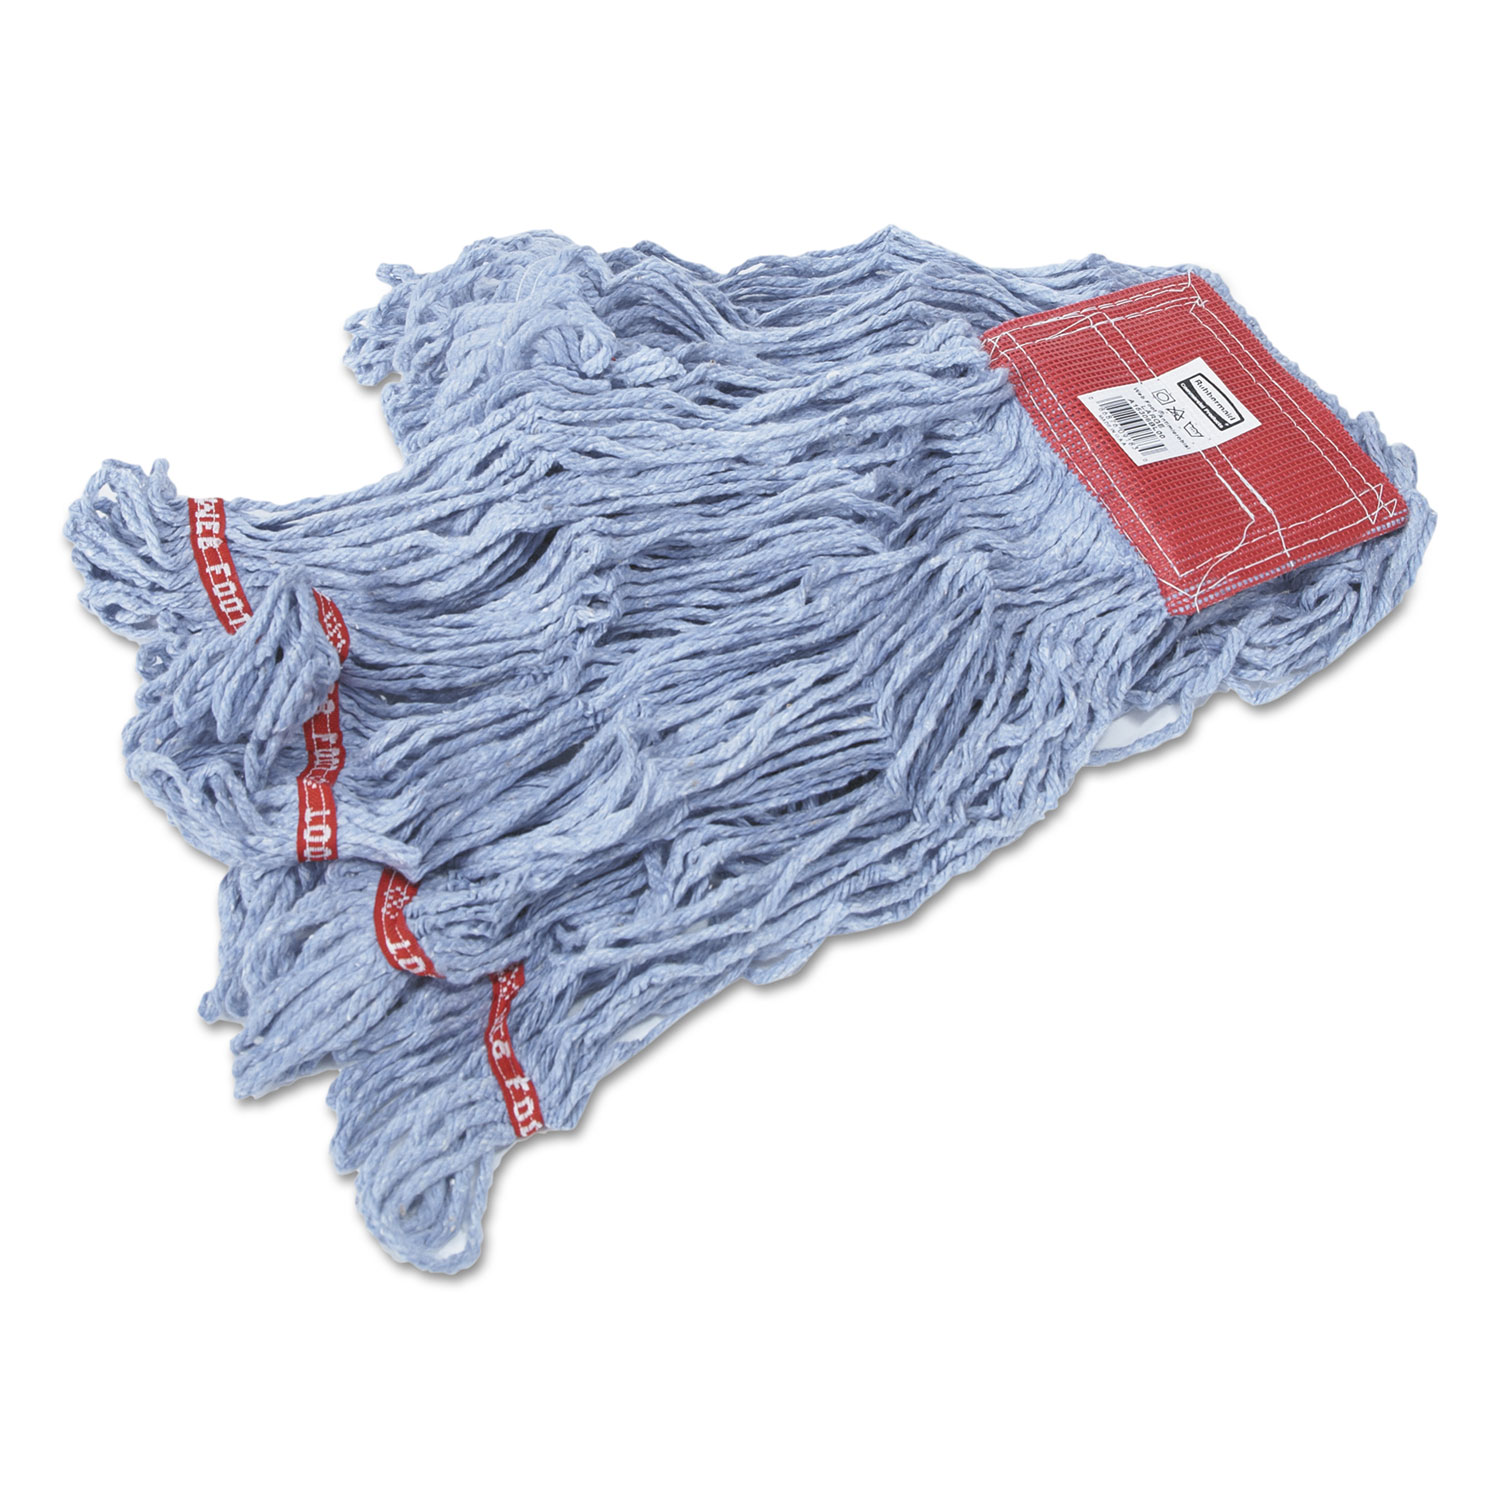  Rubbermaid Commercial FGA15306BL00 Web Foot Wet Mops, Cotton/Synthetic, Blue, Large, 5-in. Red Headband, 6/Carton (RCPA153BLU) 